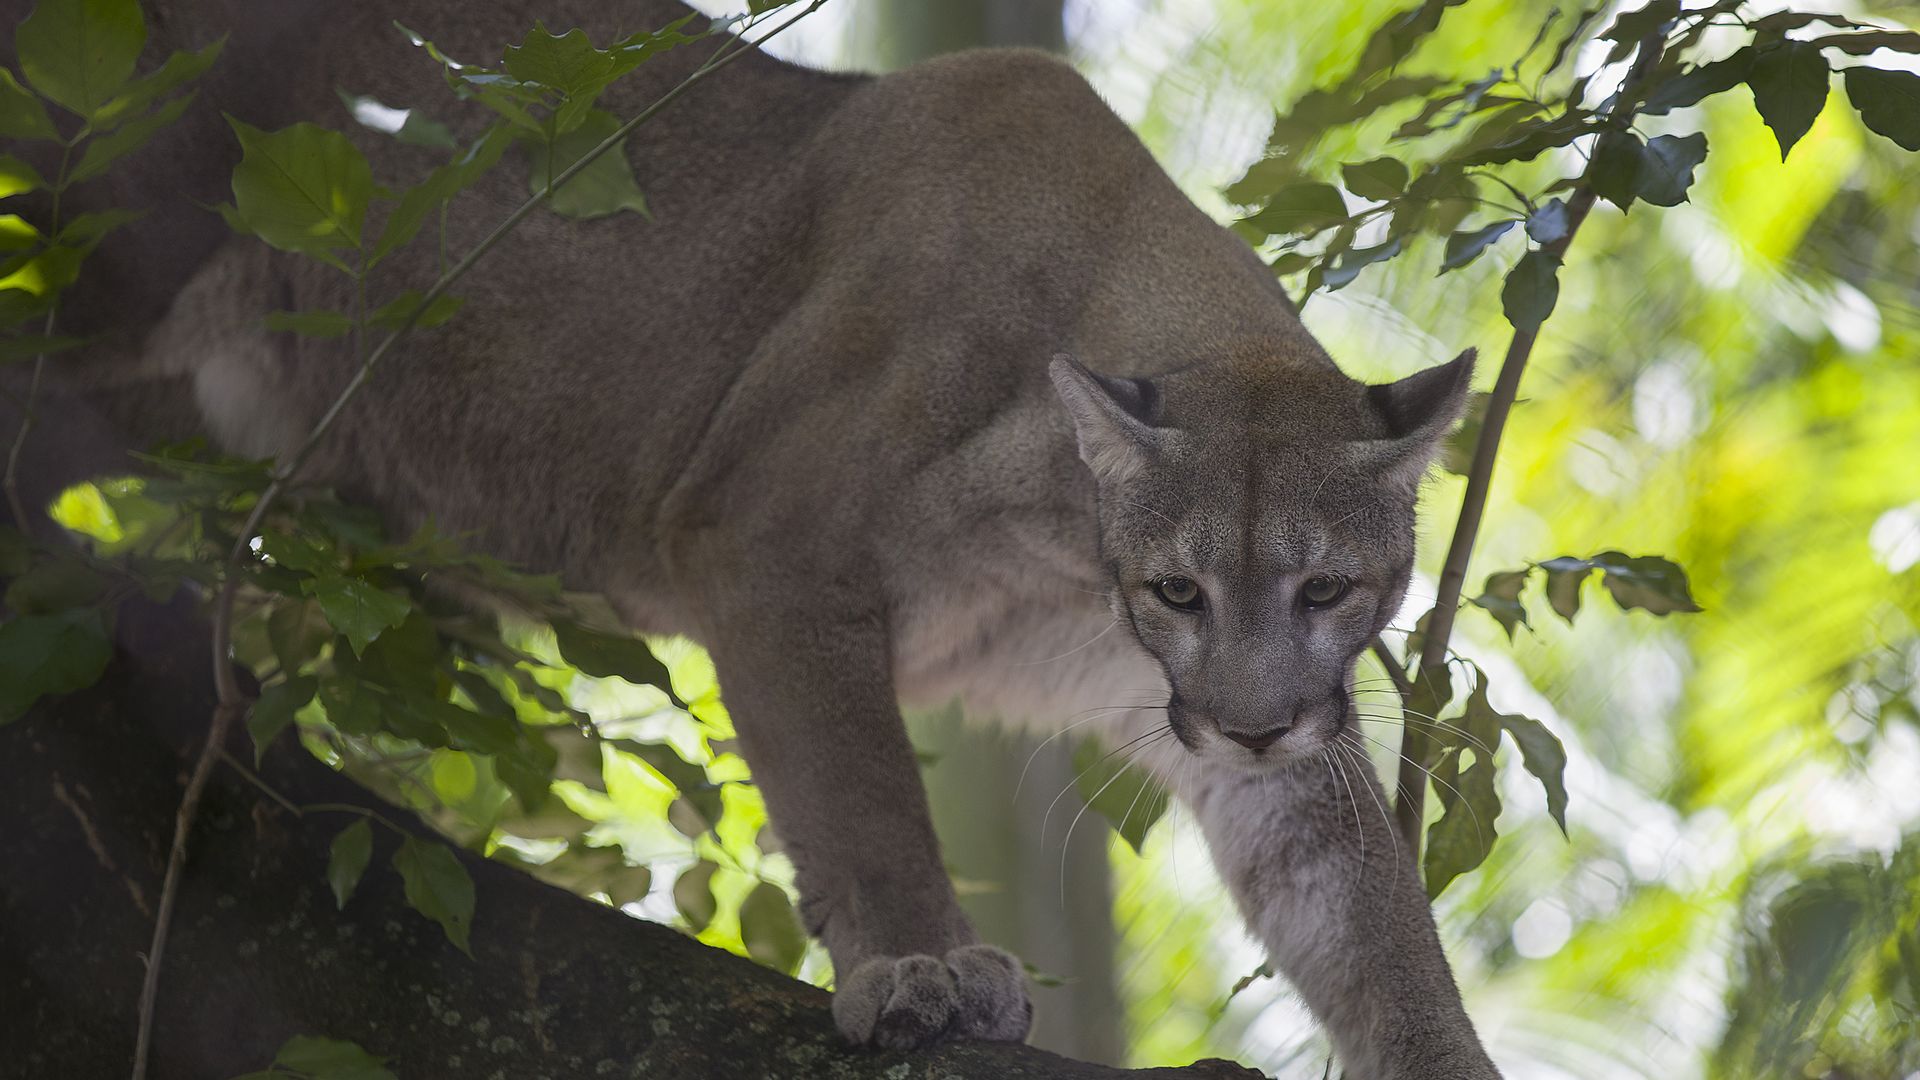 A Florida panther perches on a tree branch, appearing ready to pounce.